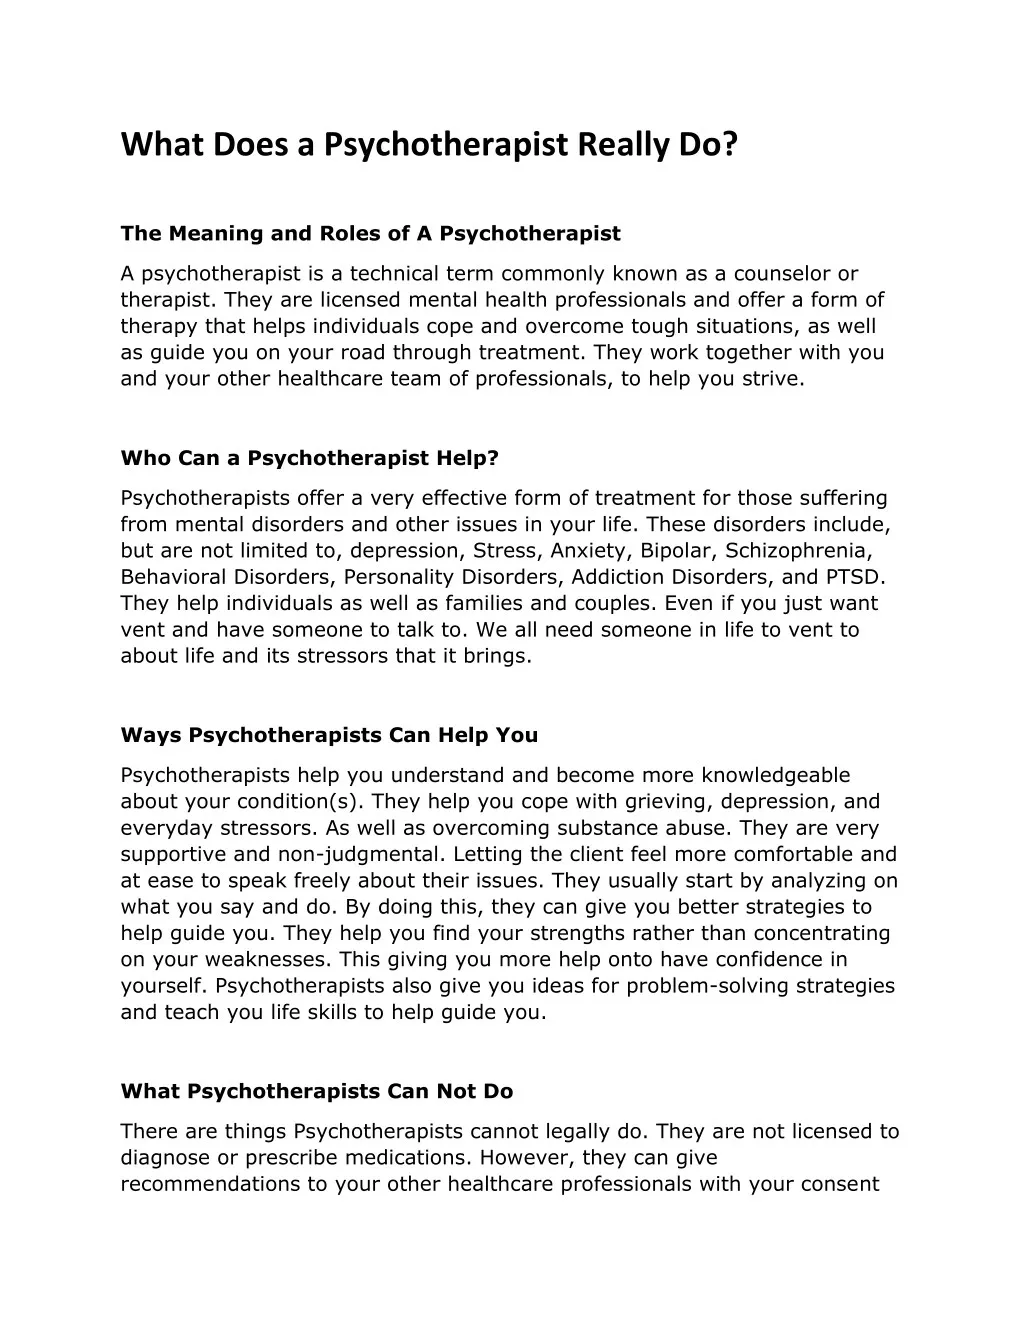 what does a psychotherapist really do